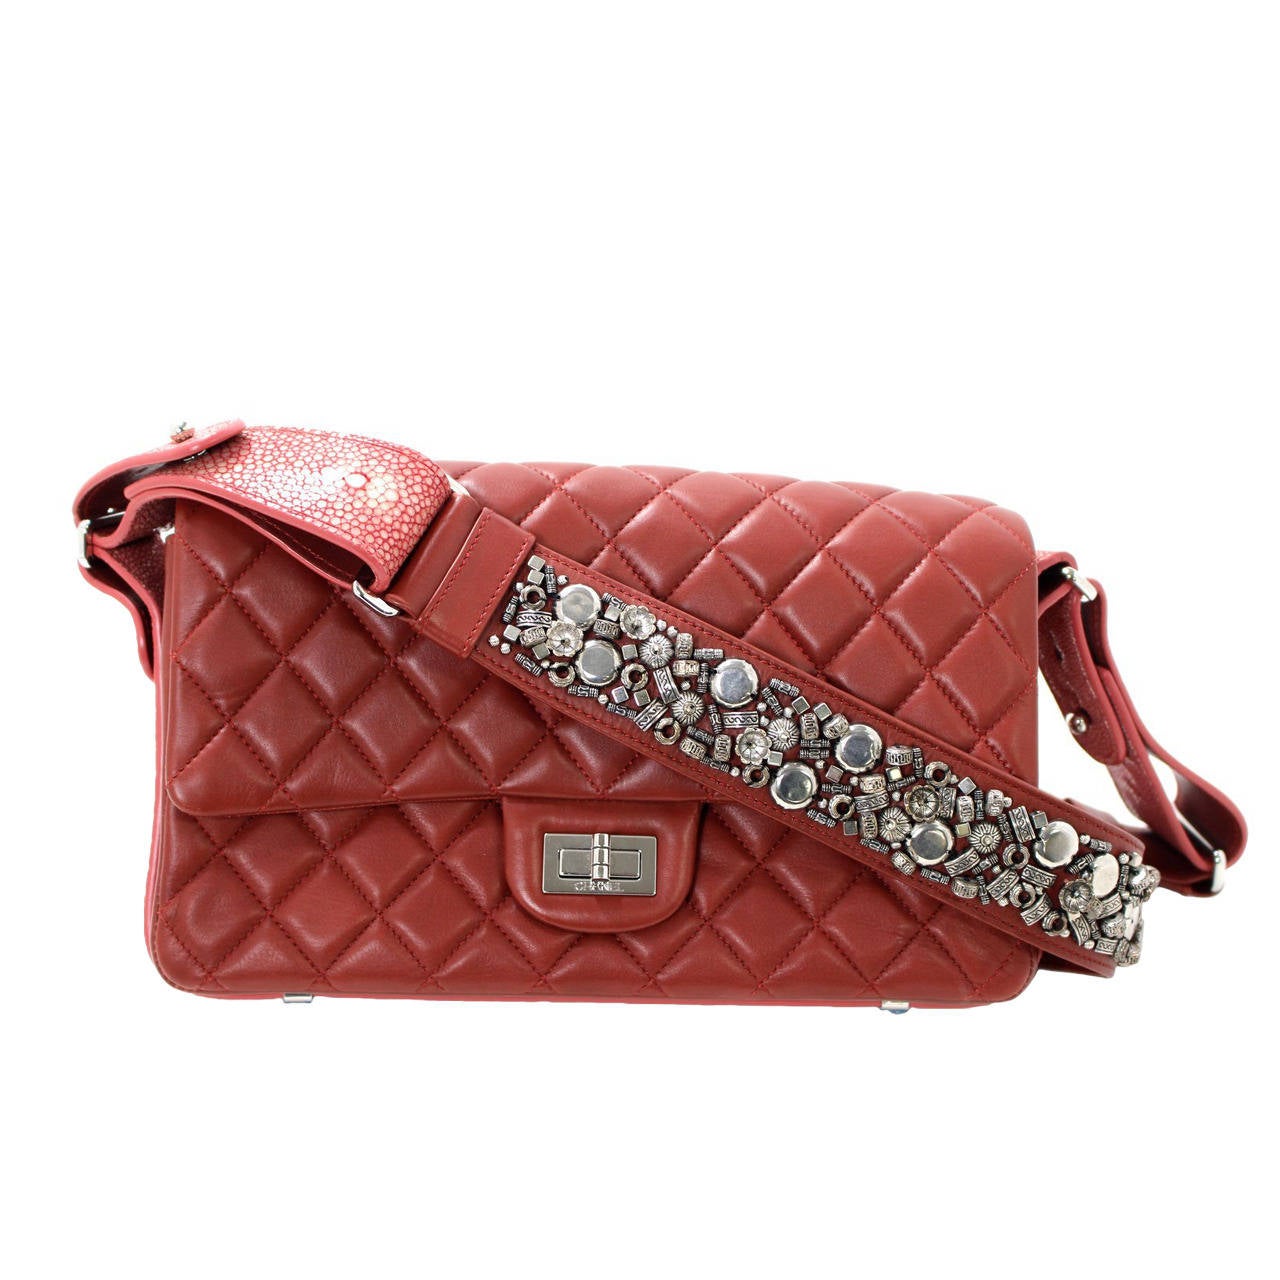 Chanel Red Leather Beaded Strap Crossbody Flap Bag For Sale